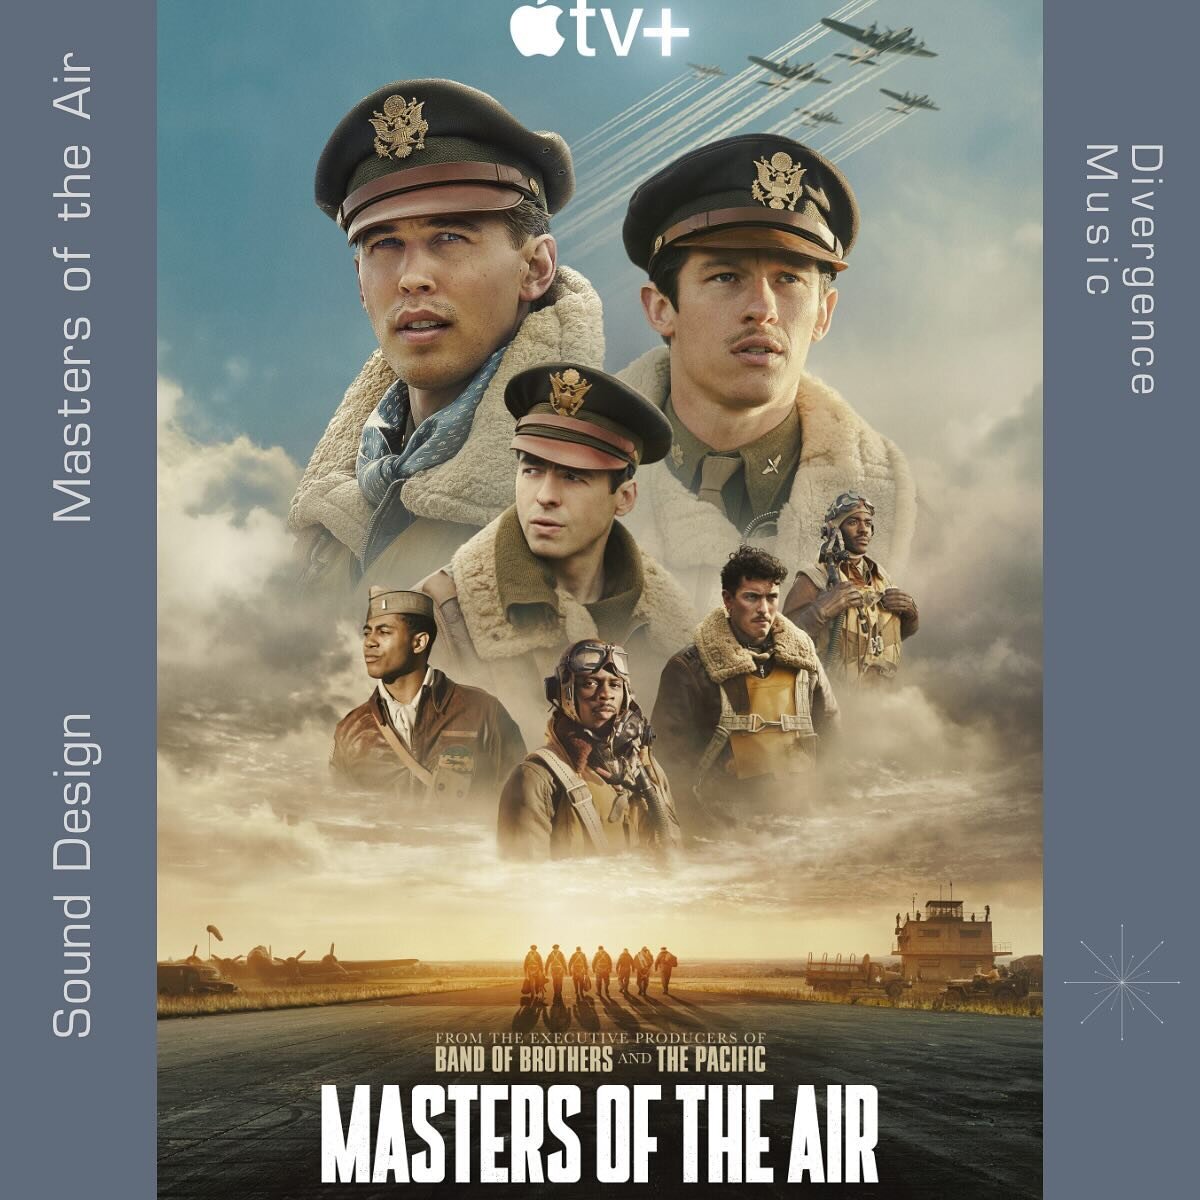 After a very successful first season we&rsquo;re pleased to confirm Sound Design from our Precision Tools album featured throughout the Masters of the Air campaign.

Thank you to @appletv for working with us!